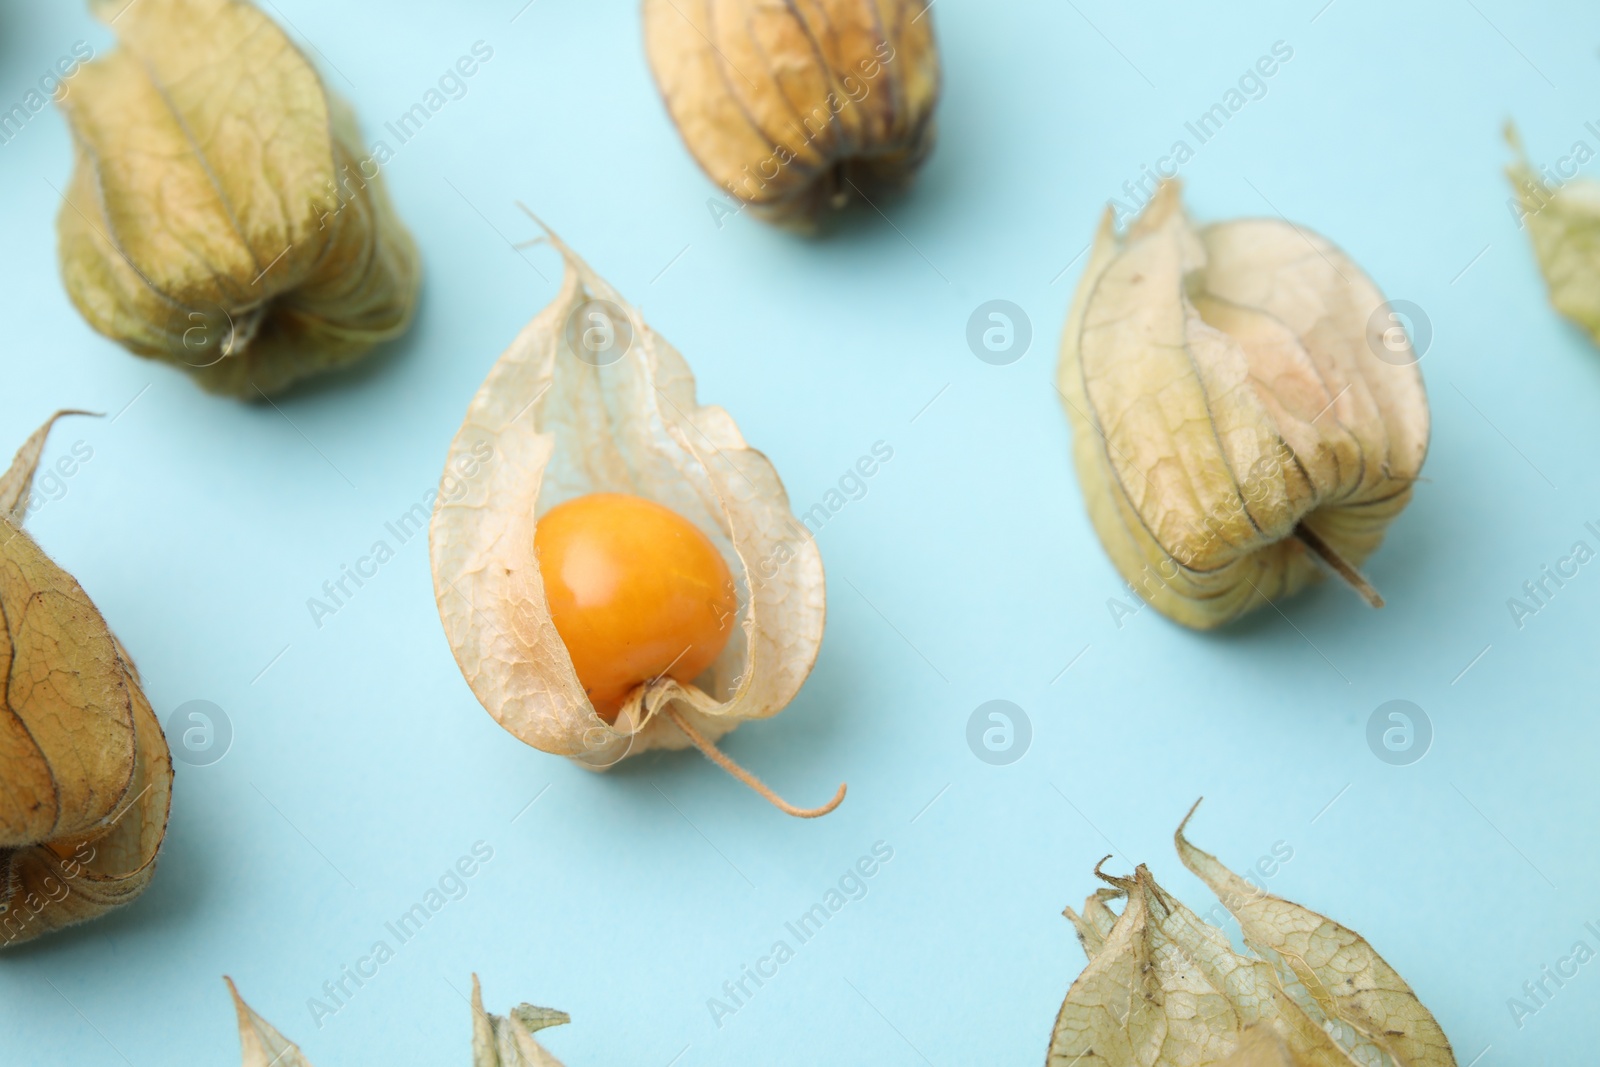 Photo of Ripe physalis fruits with calyxes on light blue background, closeup